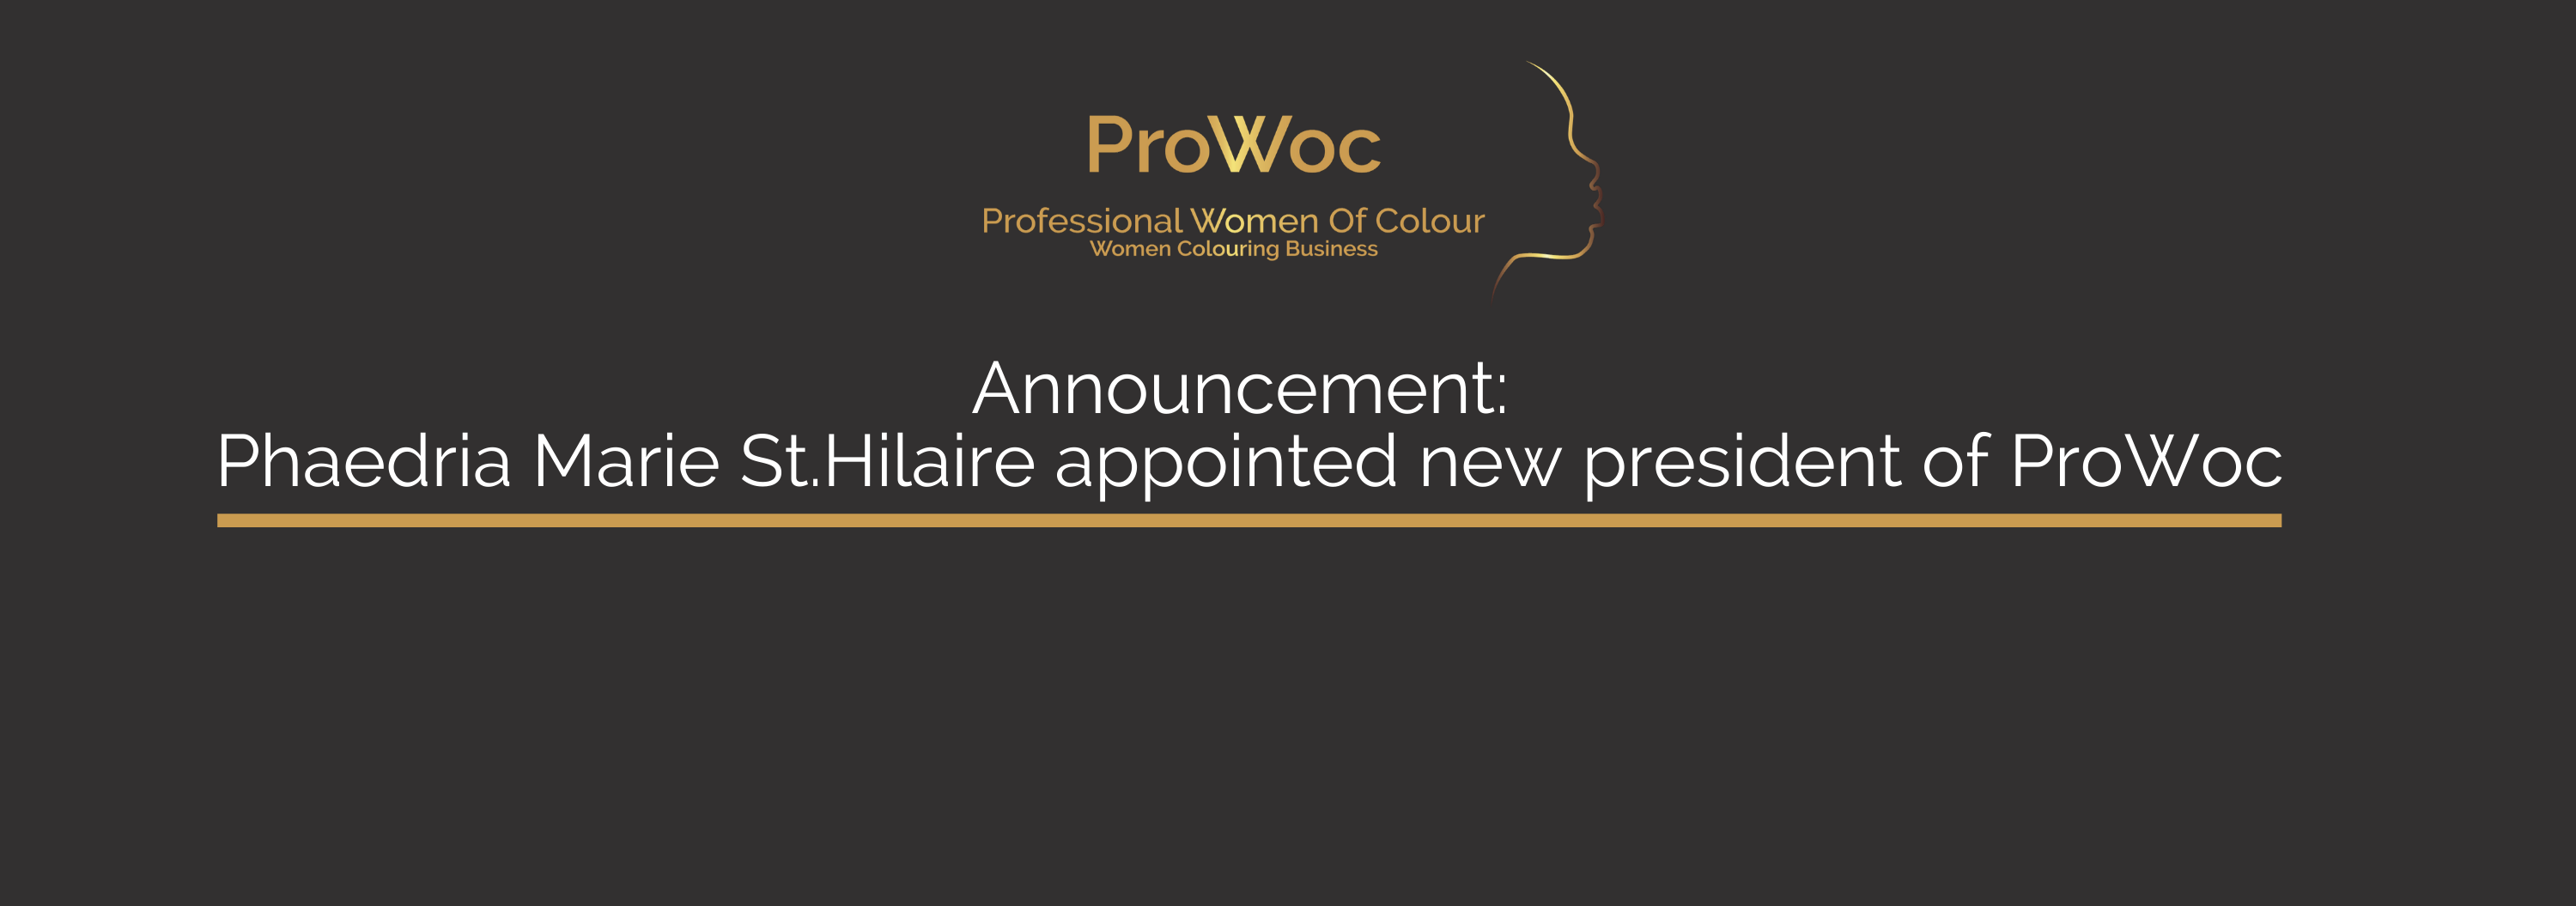 Announcement: Phaedria Marie St.Hilaire appointed new president of ProWoc